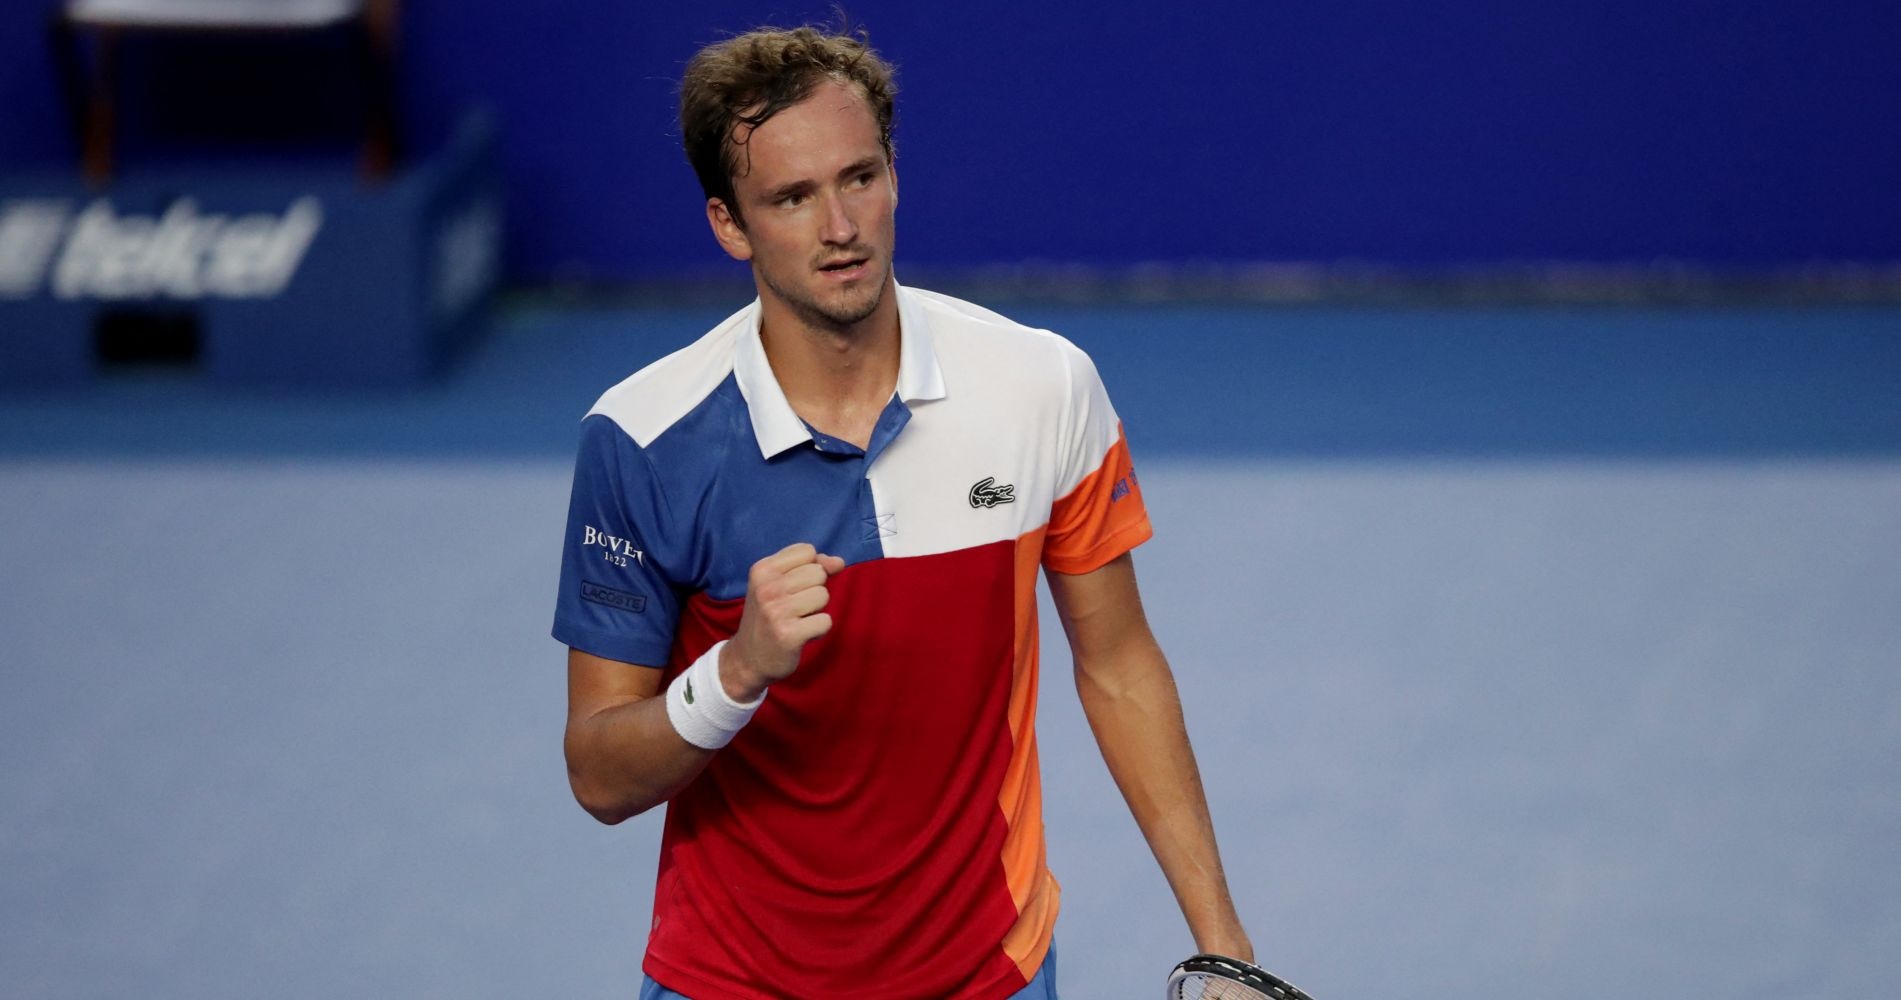 Russia's Daniil Medvedev reacts during his match against France's Benoit Paire at the Abierto Mexicano Open